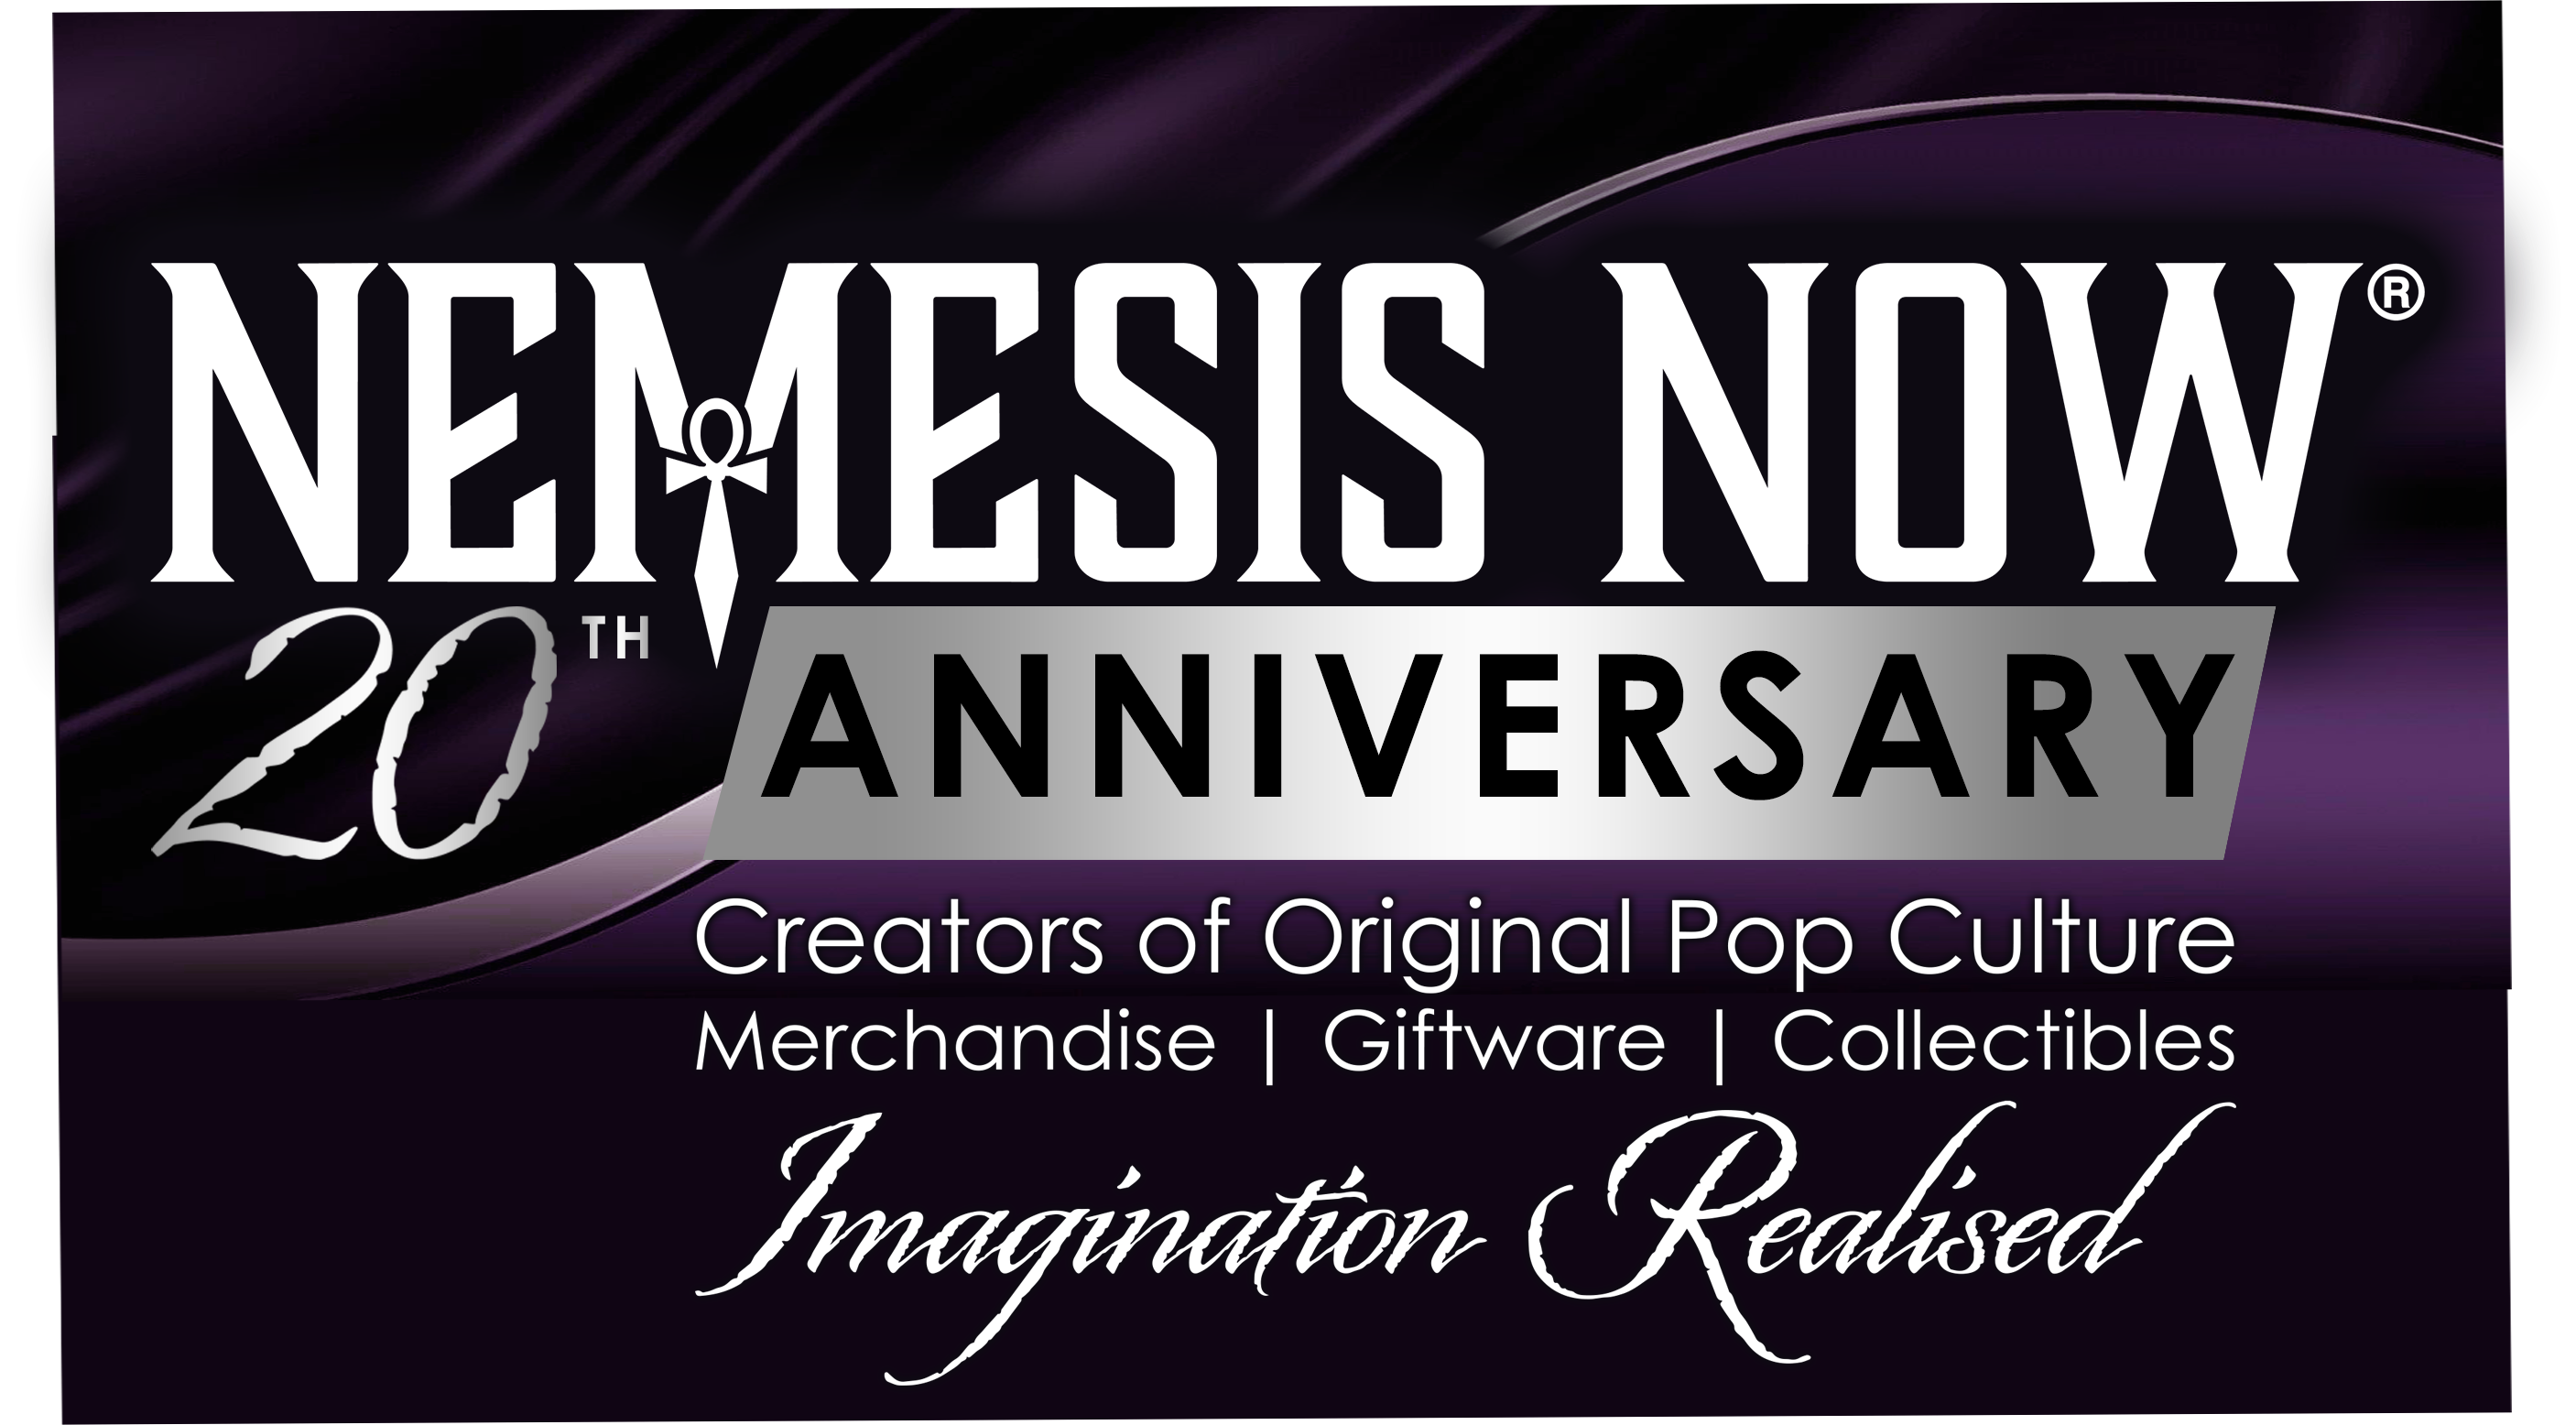 Nemesis Now, one of the UKs larges alternative gift providers